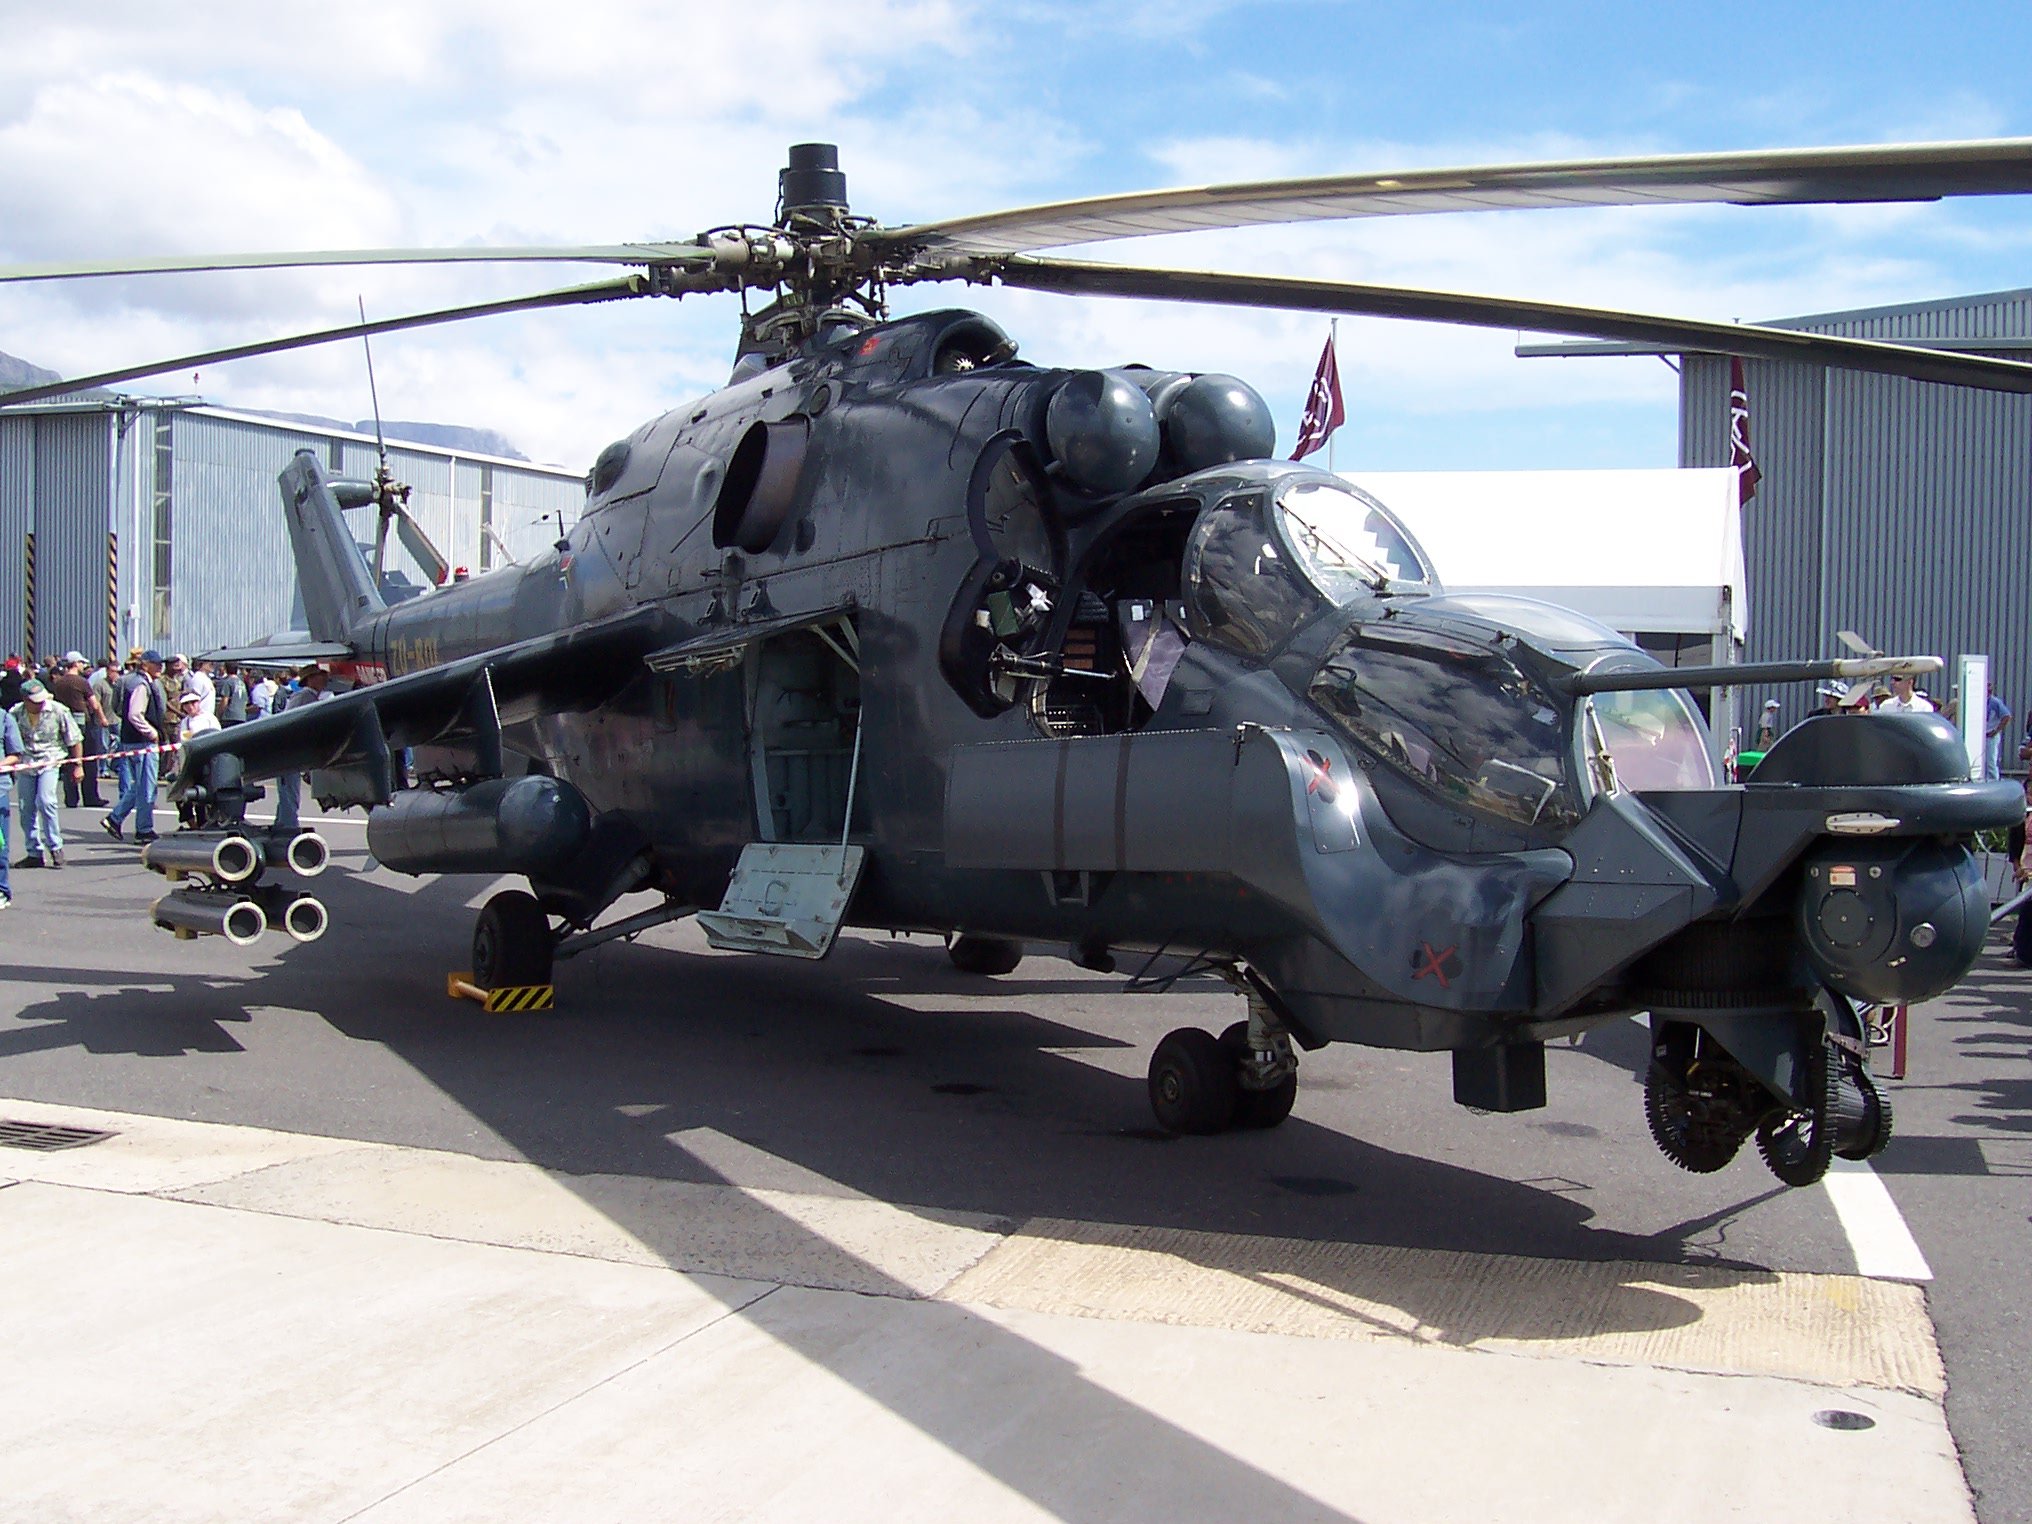 mi 24, Hind, Gunship, Russian, Russia, Military, Weapon, Helicopter, Aircraft,  47 Wallpaper